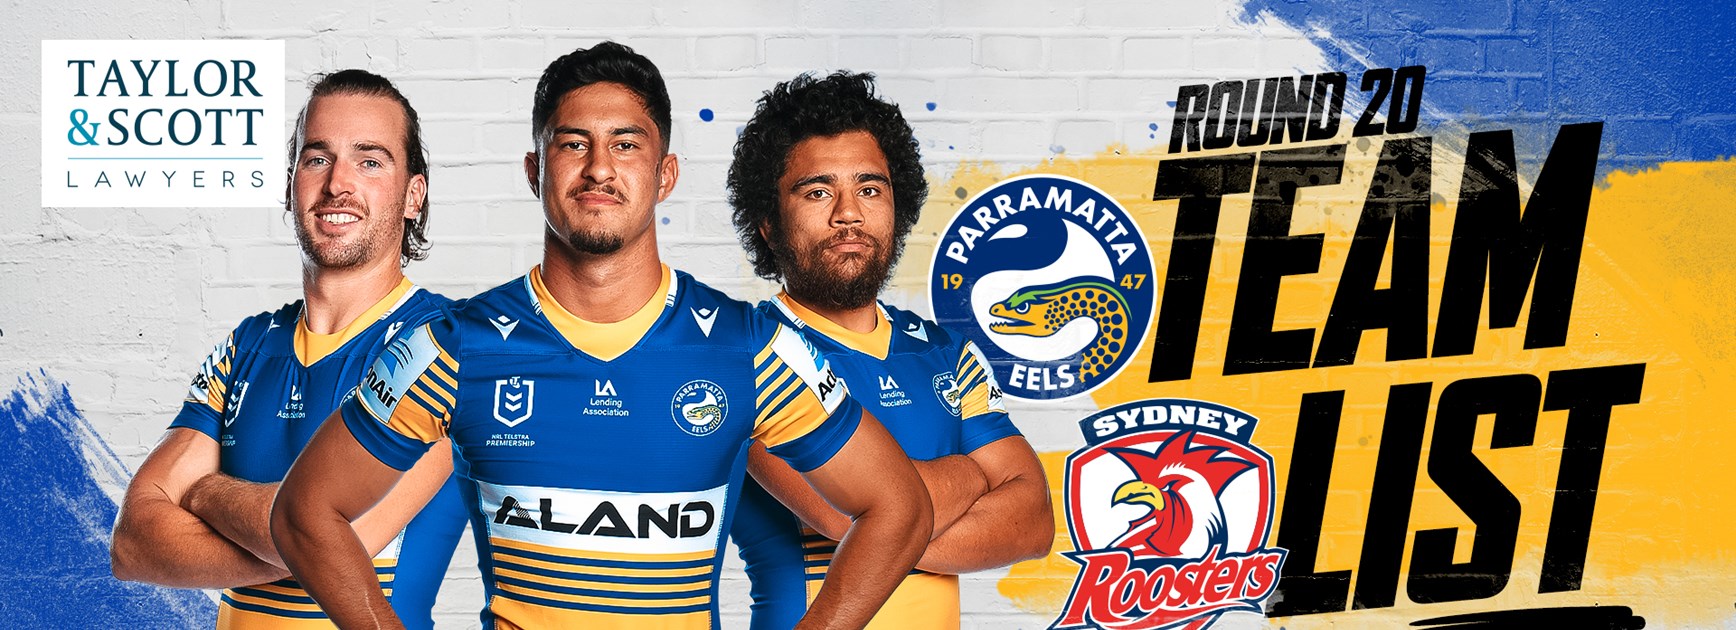 Team List - Roosters v Eels, Round 20